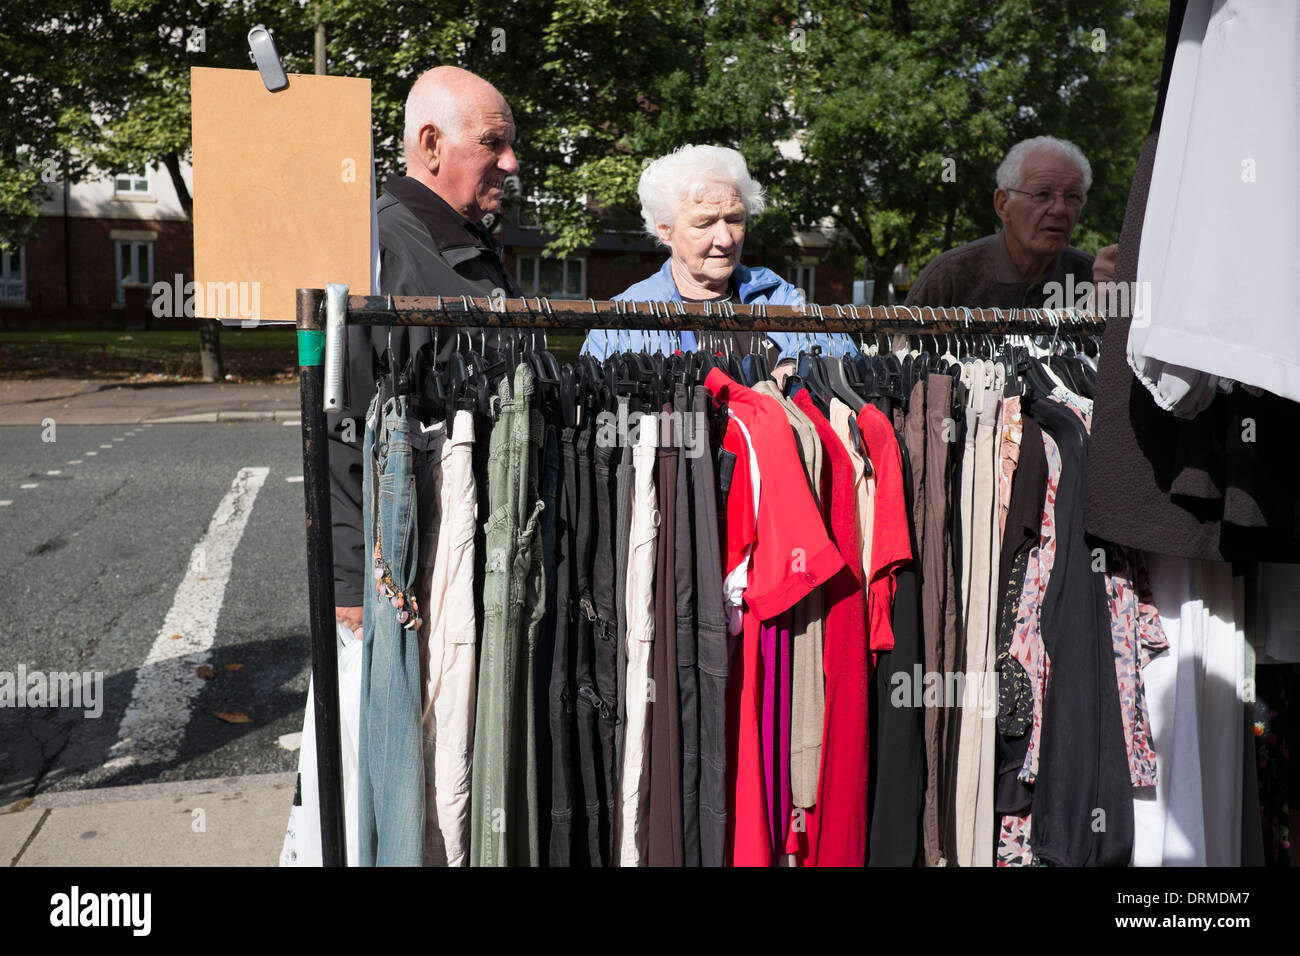 Old people clothes shopping market cheap clothing Stock Photo